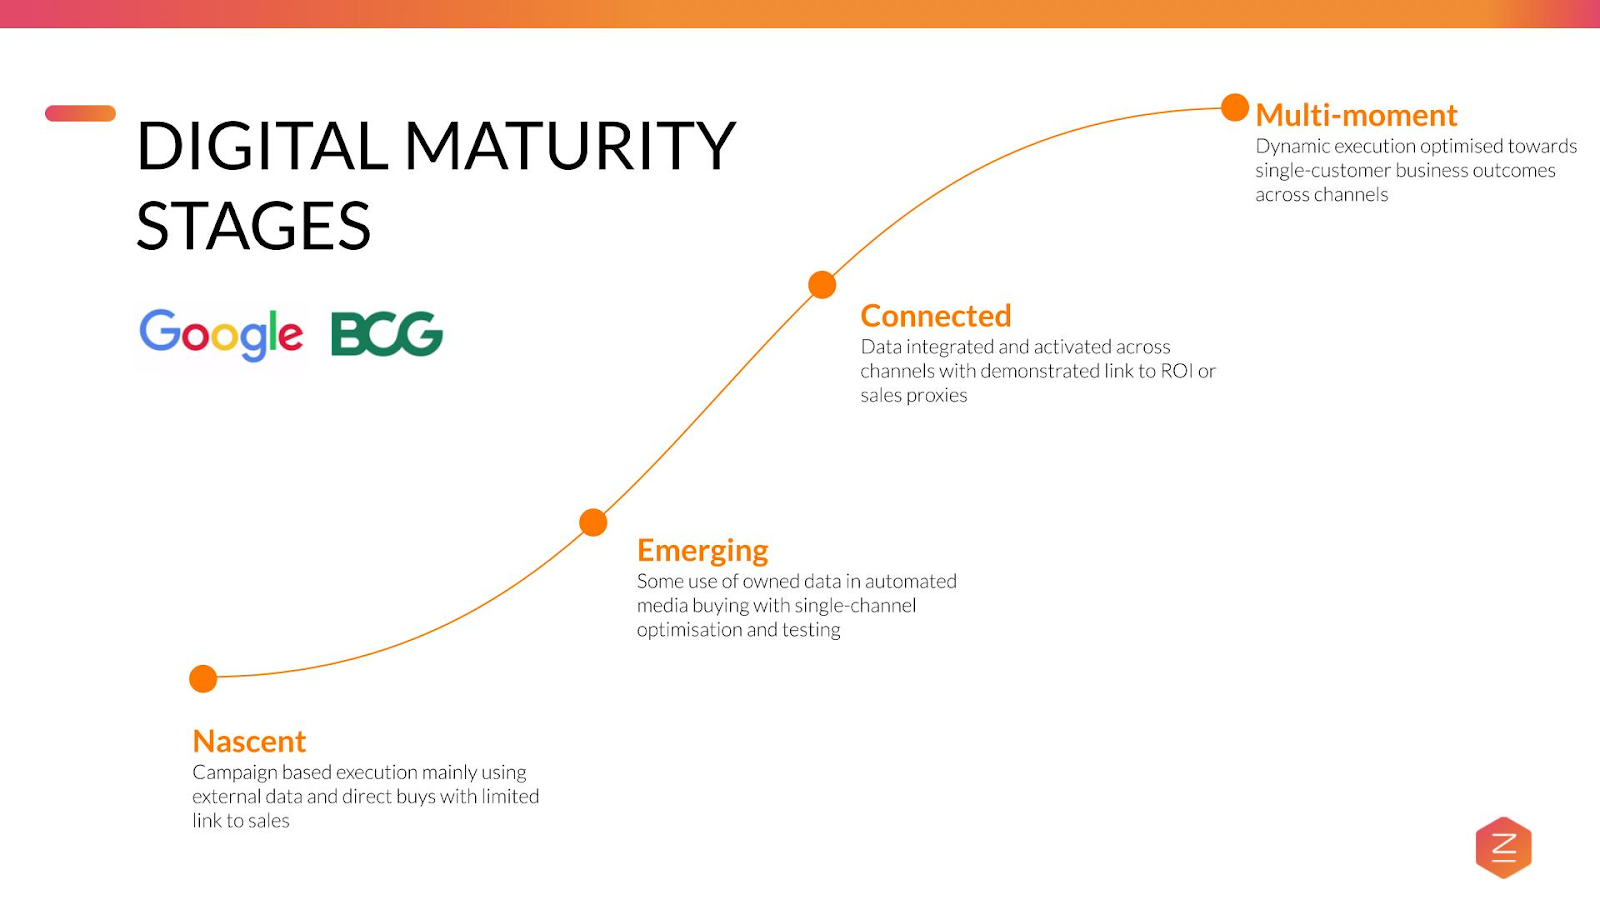 The 4 stages of digital maturity